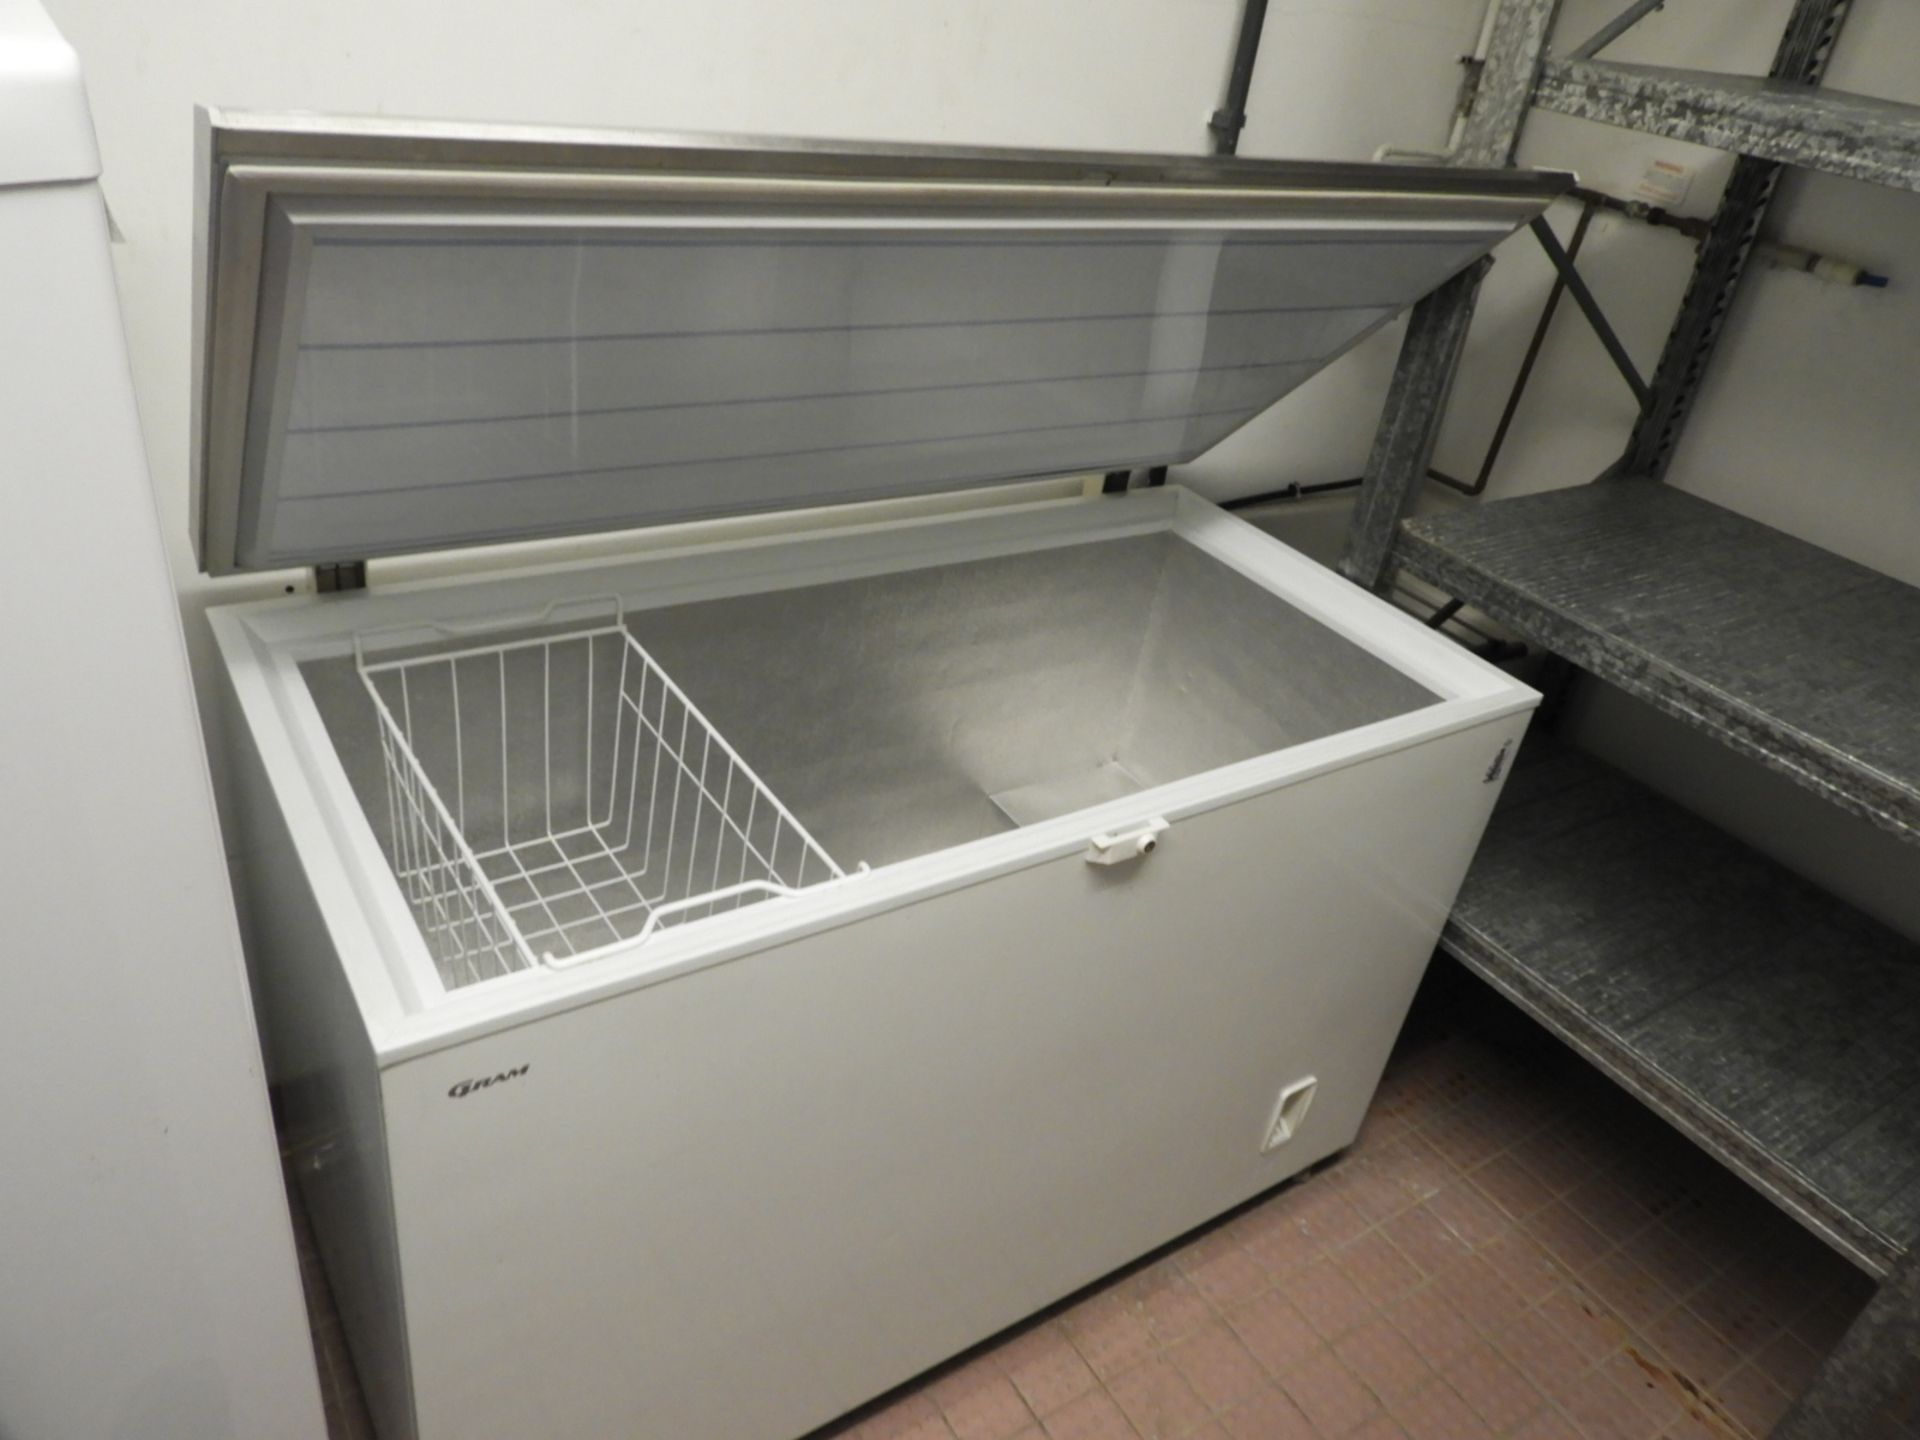 *Gram Chest Freezer with Stainless Steel Lid